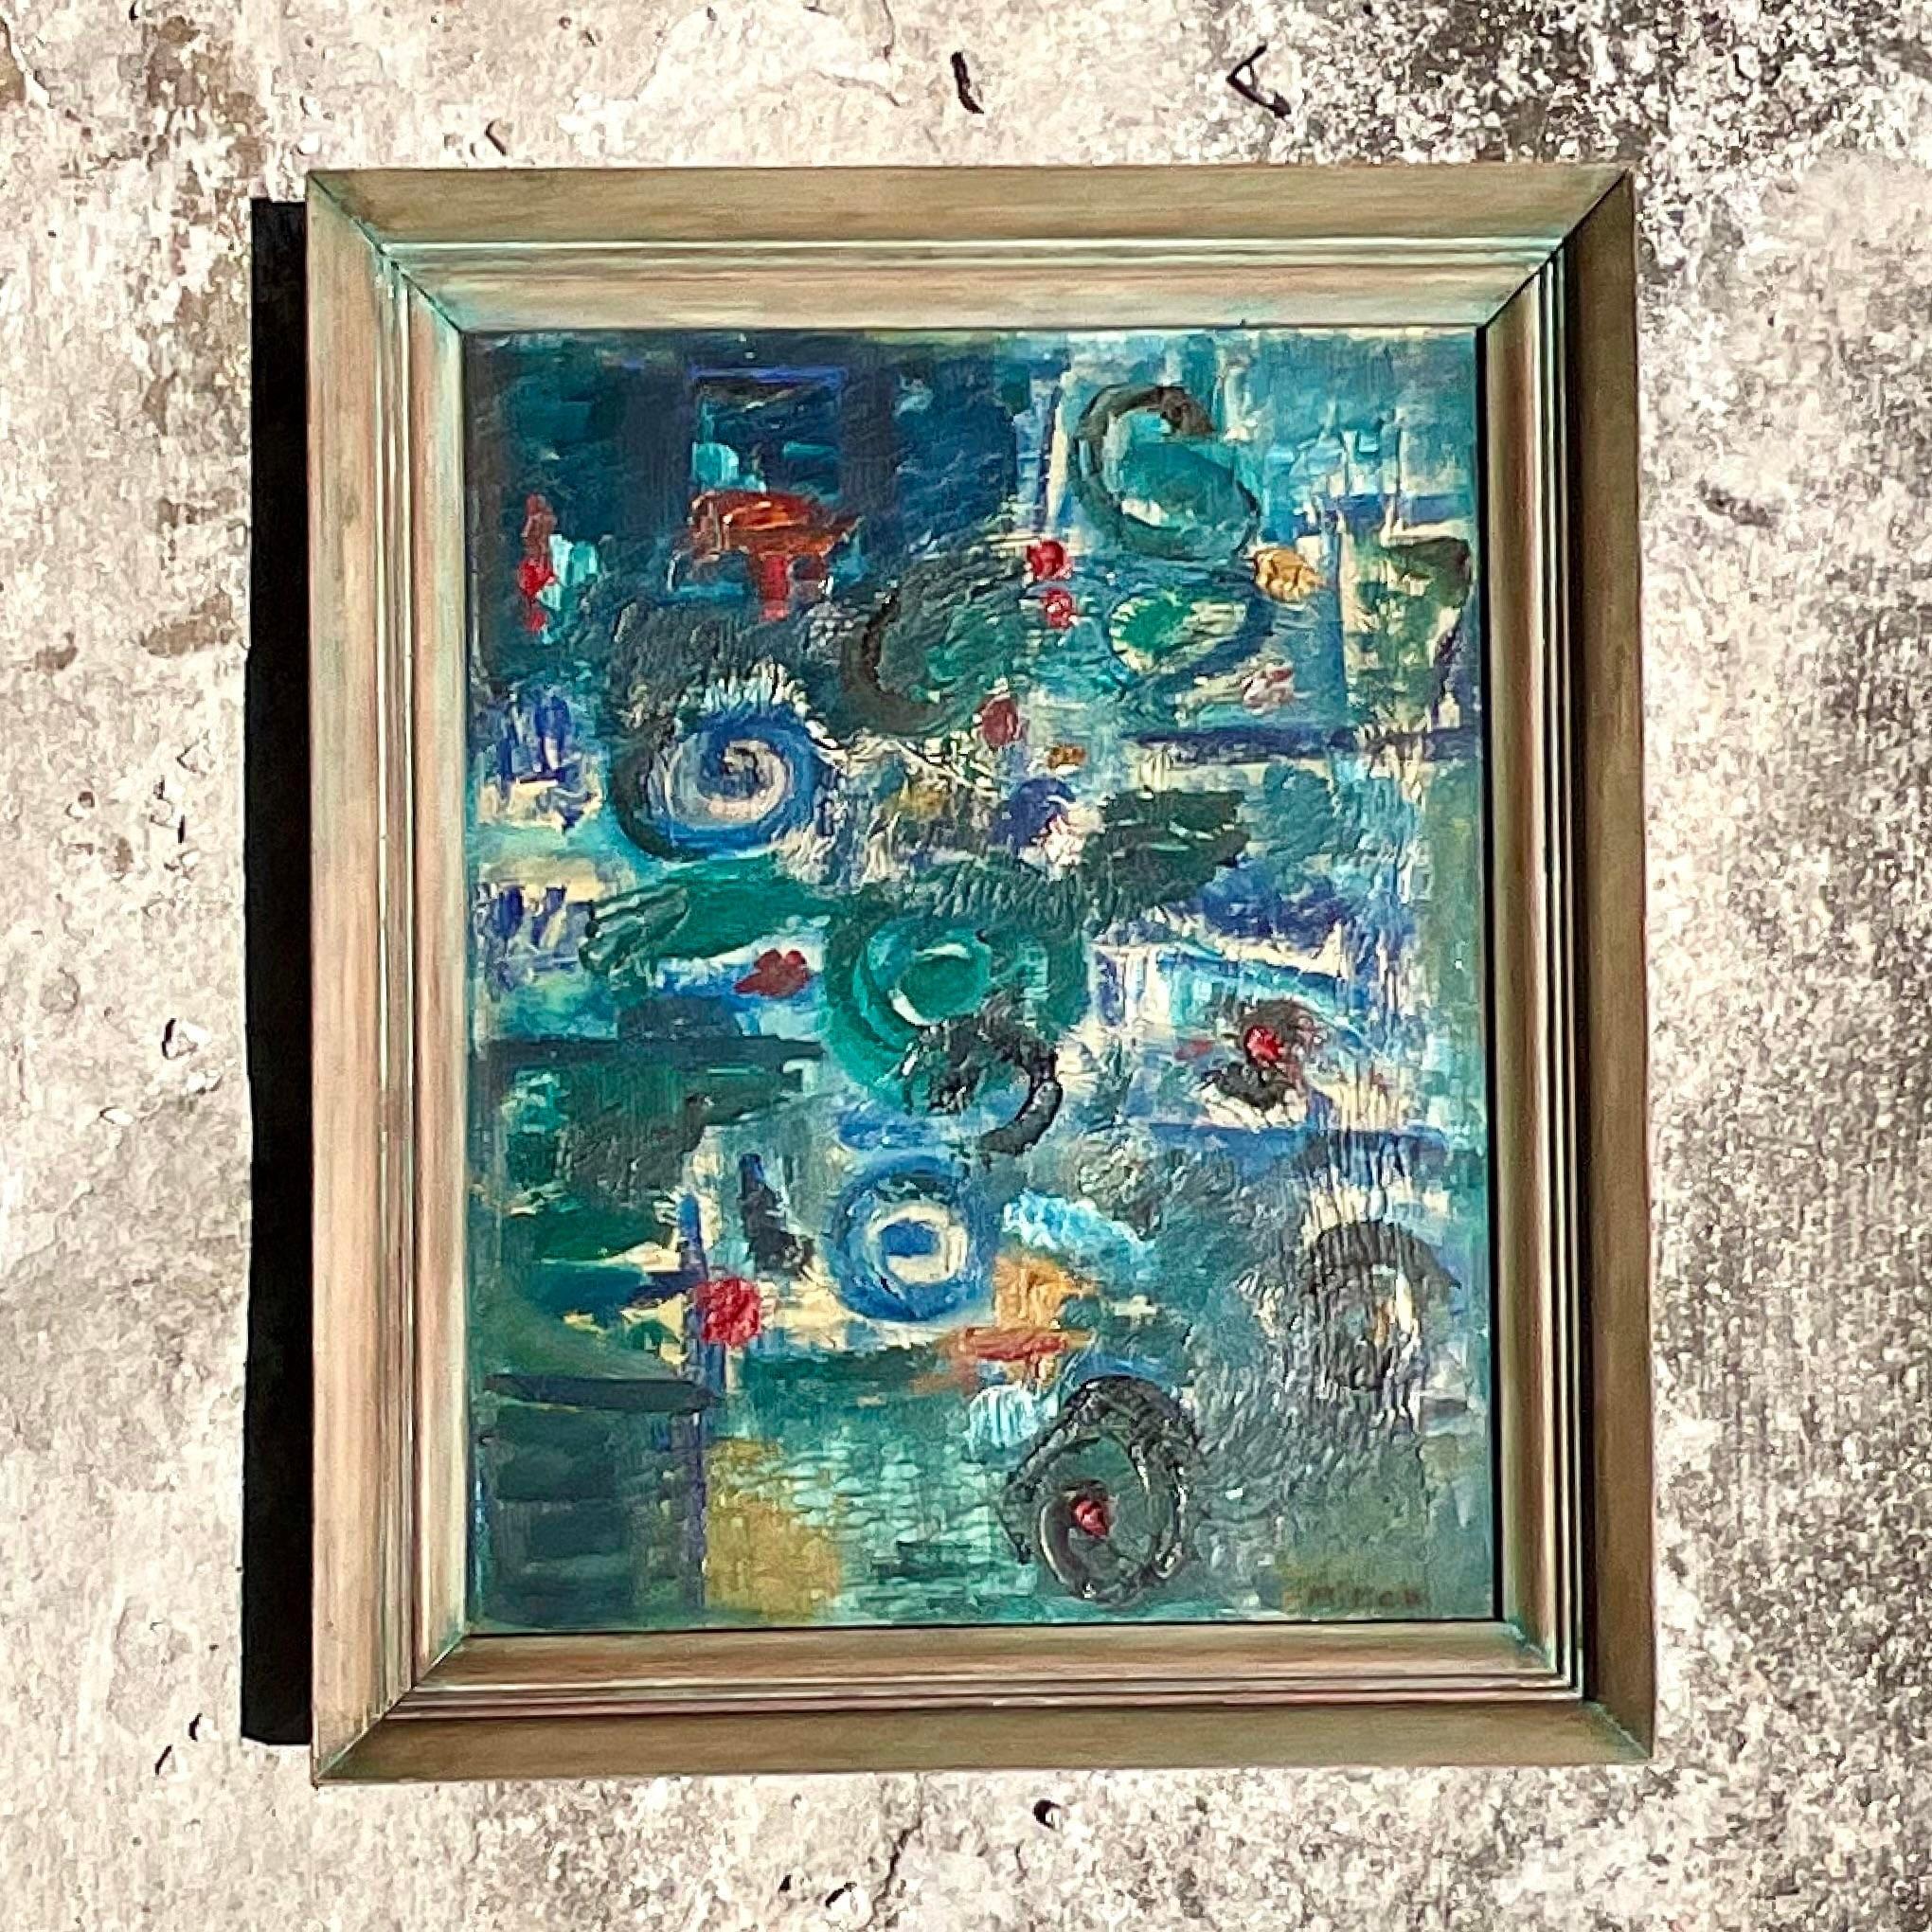 A stunning vintage MCM original oil painting. A chic abstract composition in brilliant shades of blue. Signed and dated by the artist 1958. Acquired from a Palm Beach estate.